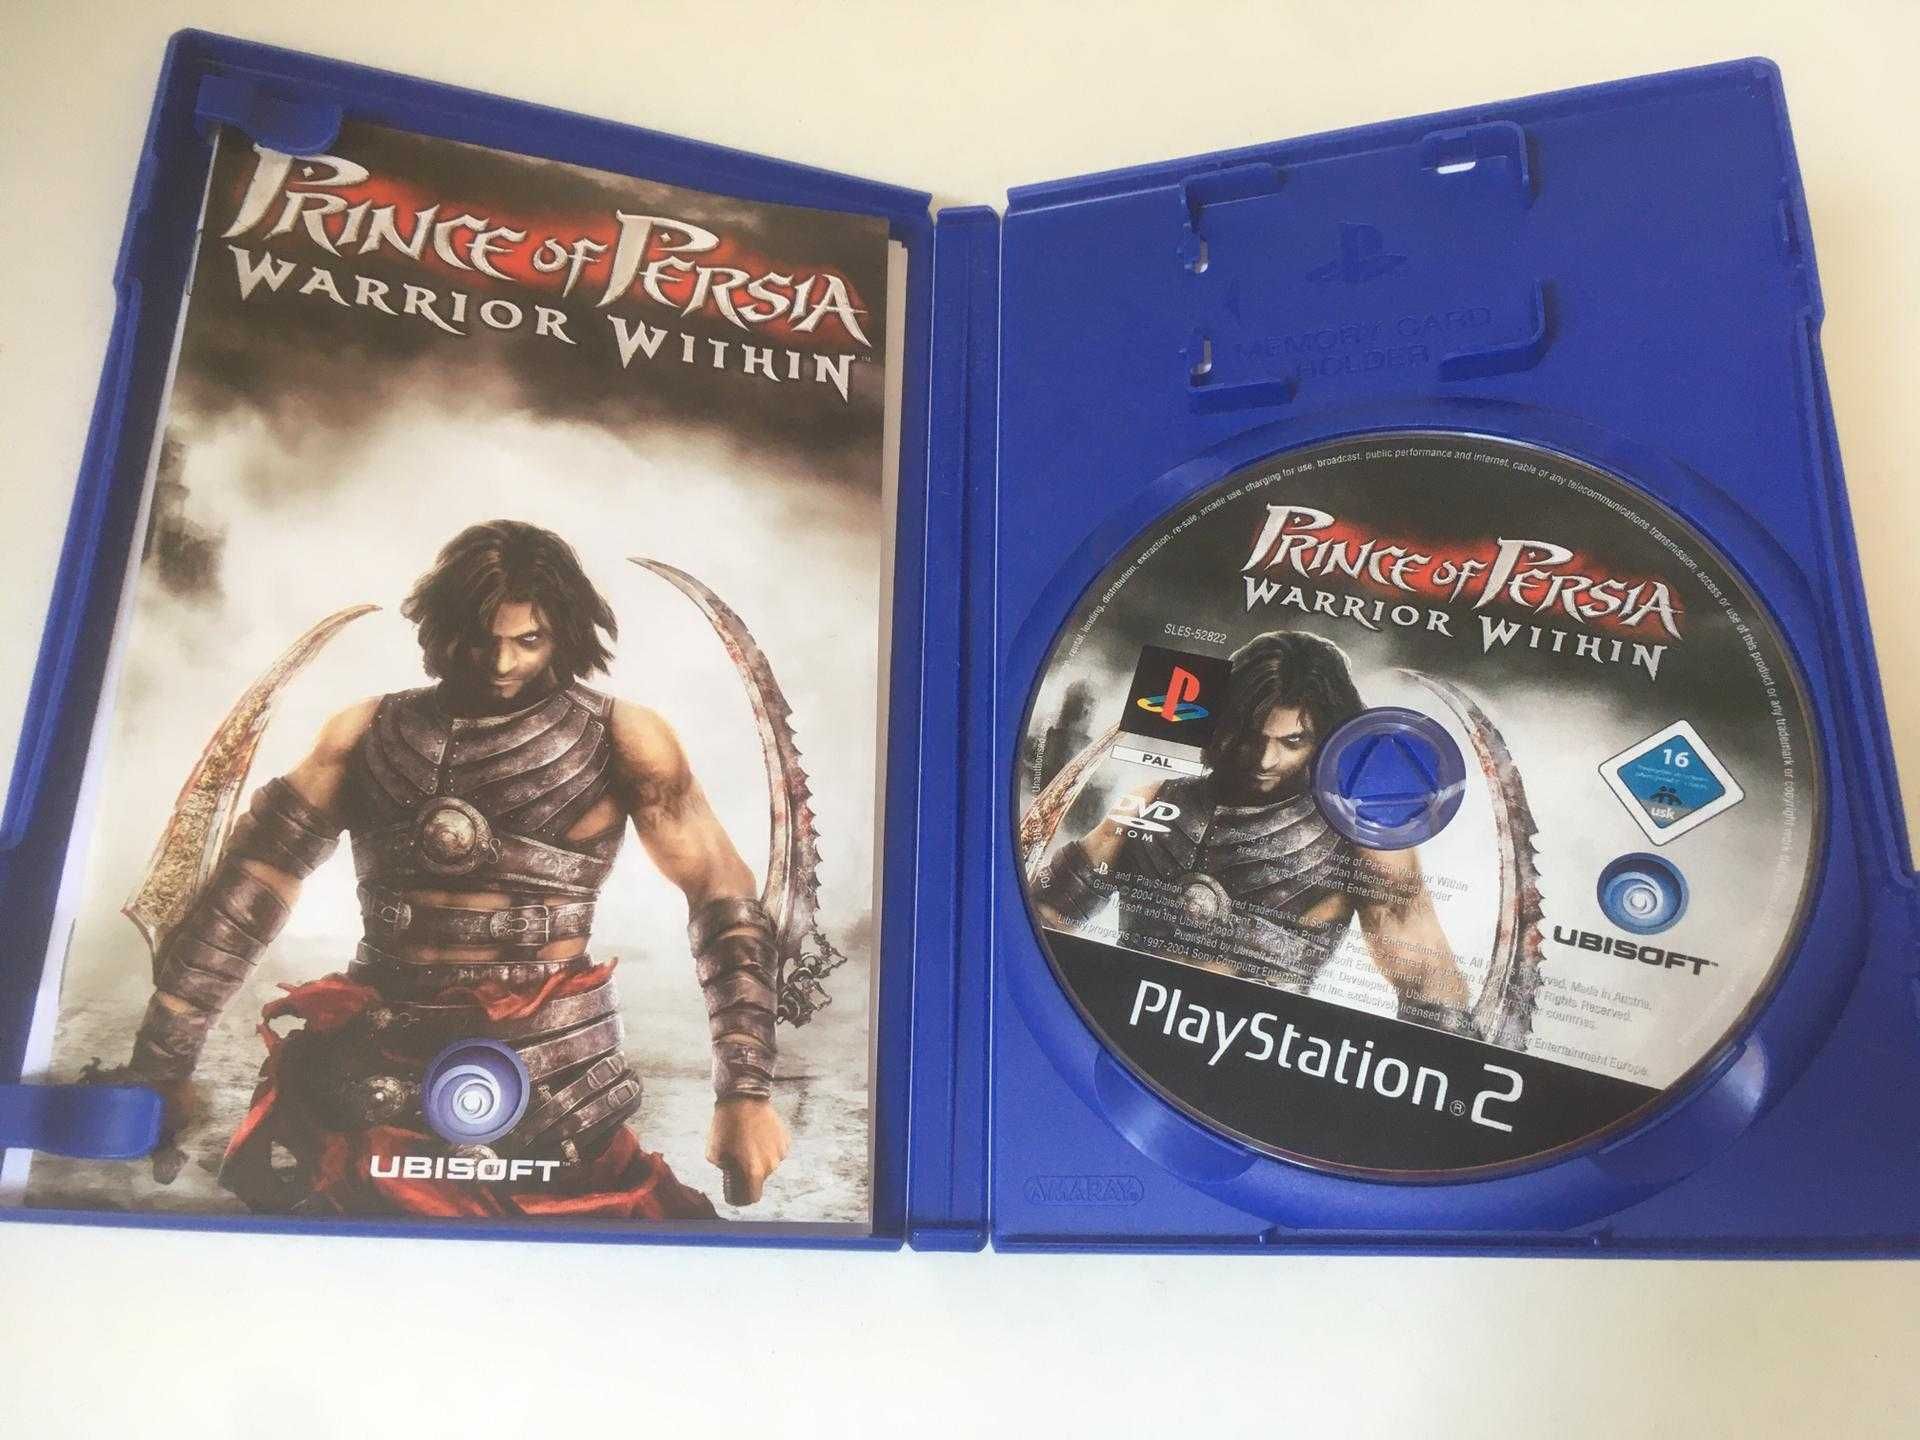 Prince of Persia Warrior Within Sony Playstation 2 Game